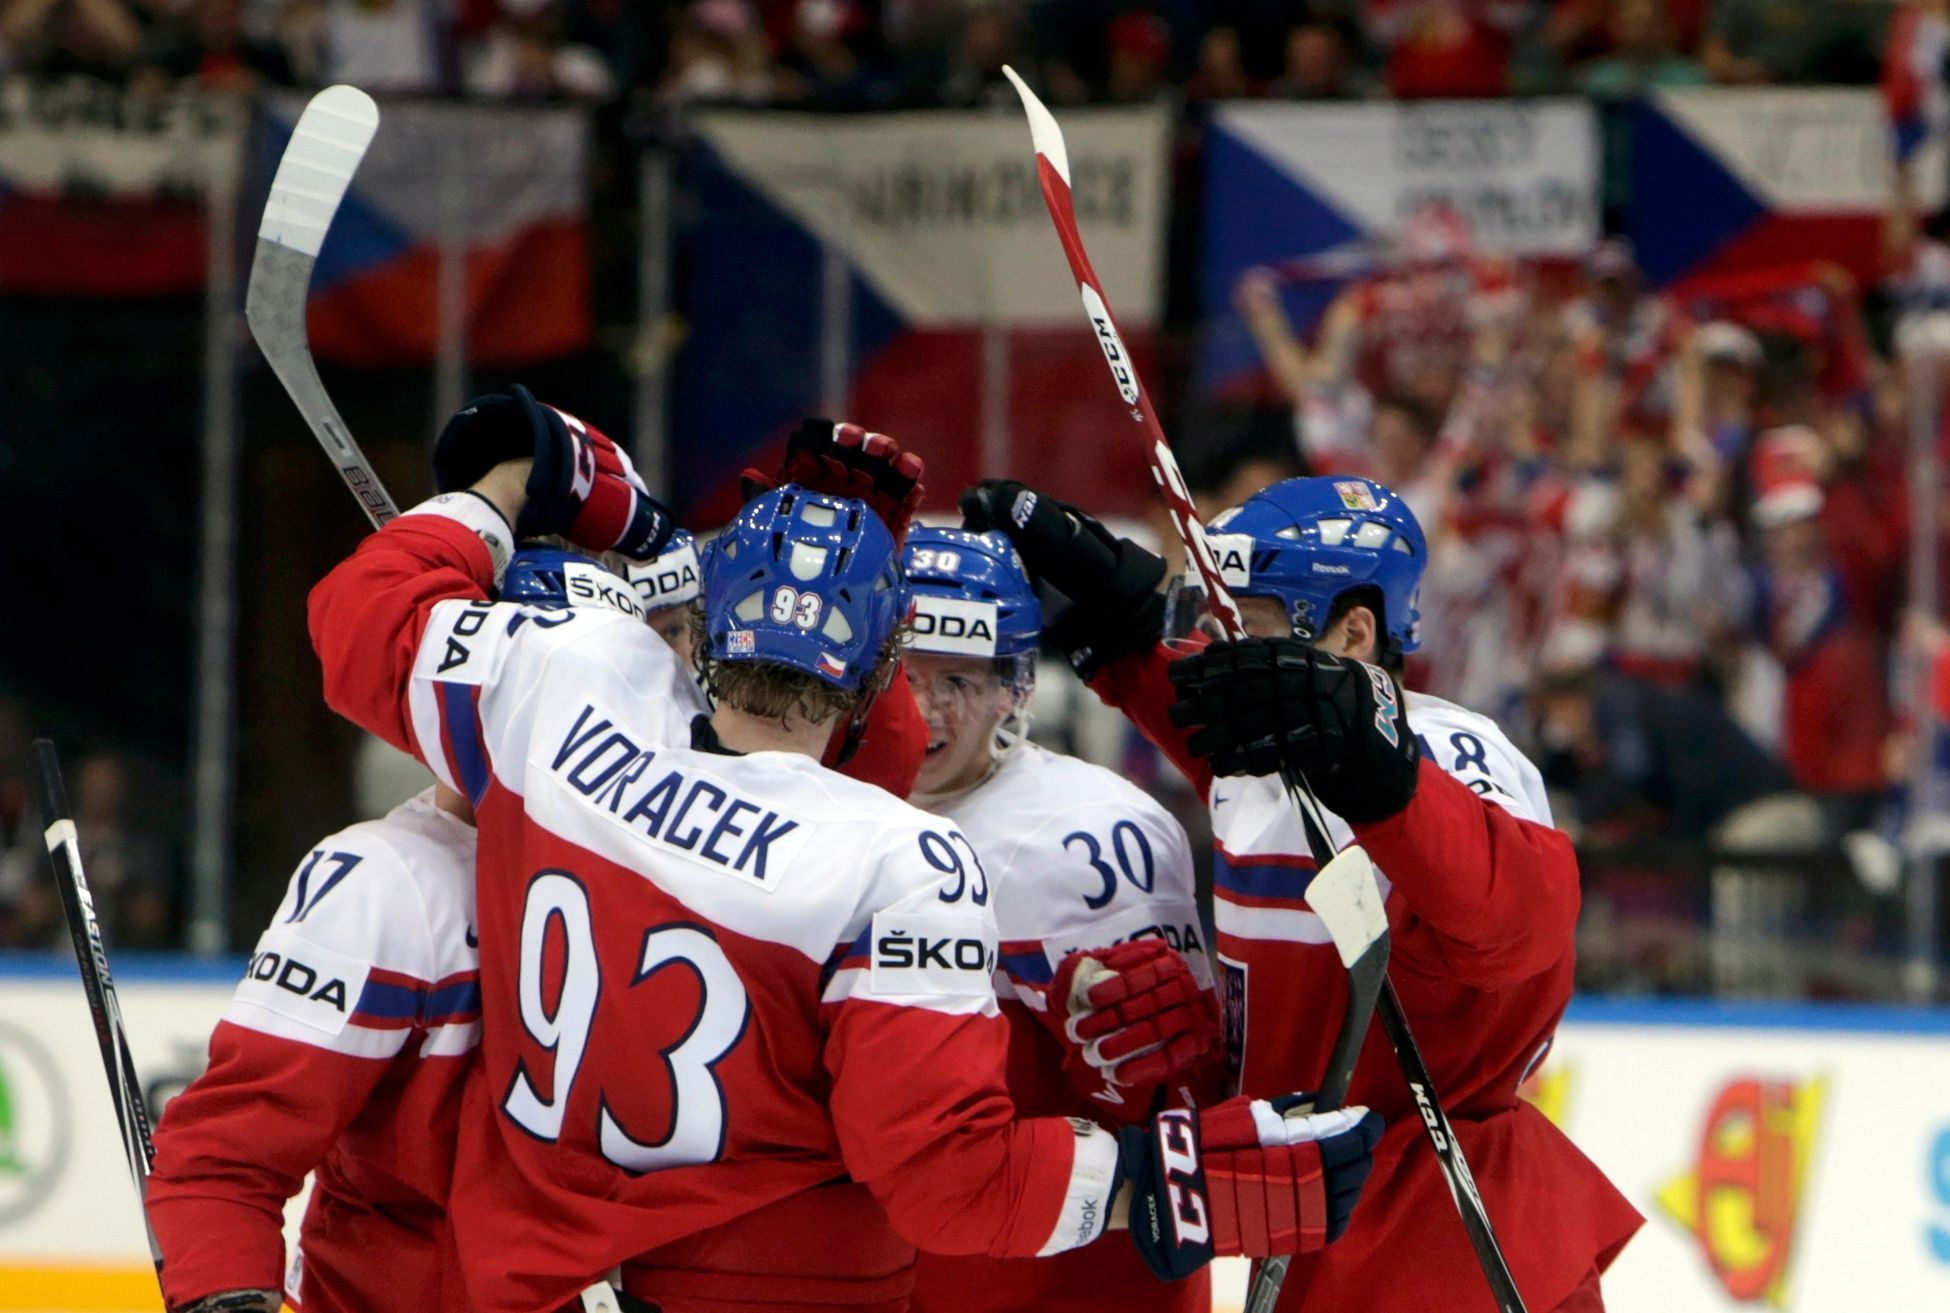 Sobotka of the Czech Republic celebrates his goal with team mates during their Ice Hockey World Championship game against France in Prague